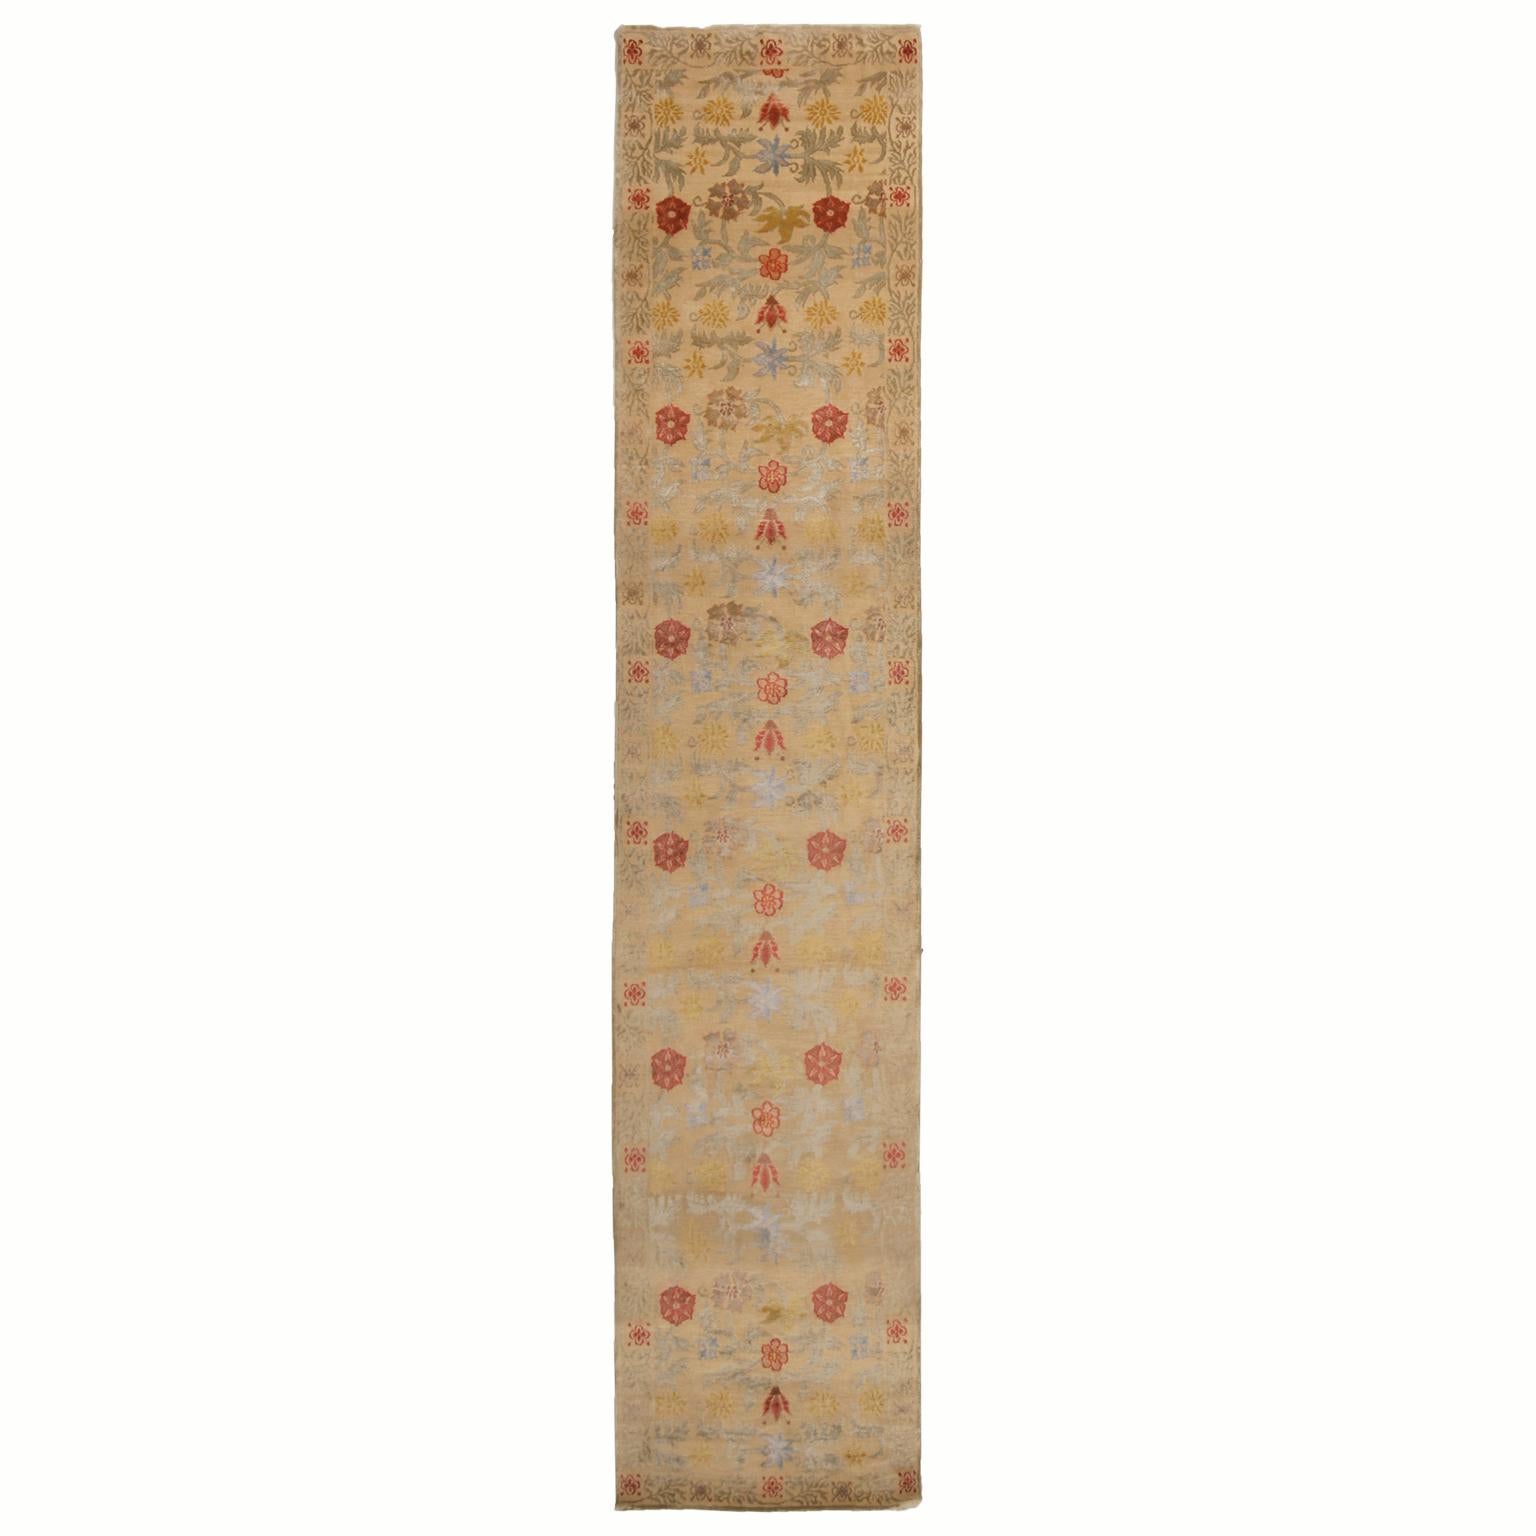 Hand knotted in Nepal, this floral runner features a Bilbao floral design, hand knotted in a lustrous combination of wool and silk. Named for the Spanish city fathering its ancestral patterns, the repetition of the all over tulip and palette floral